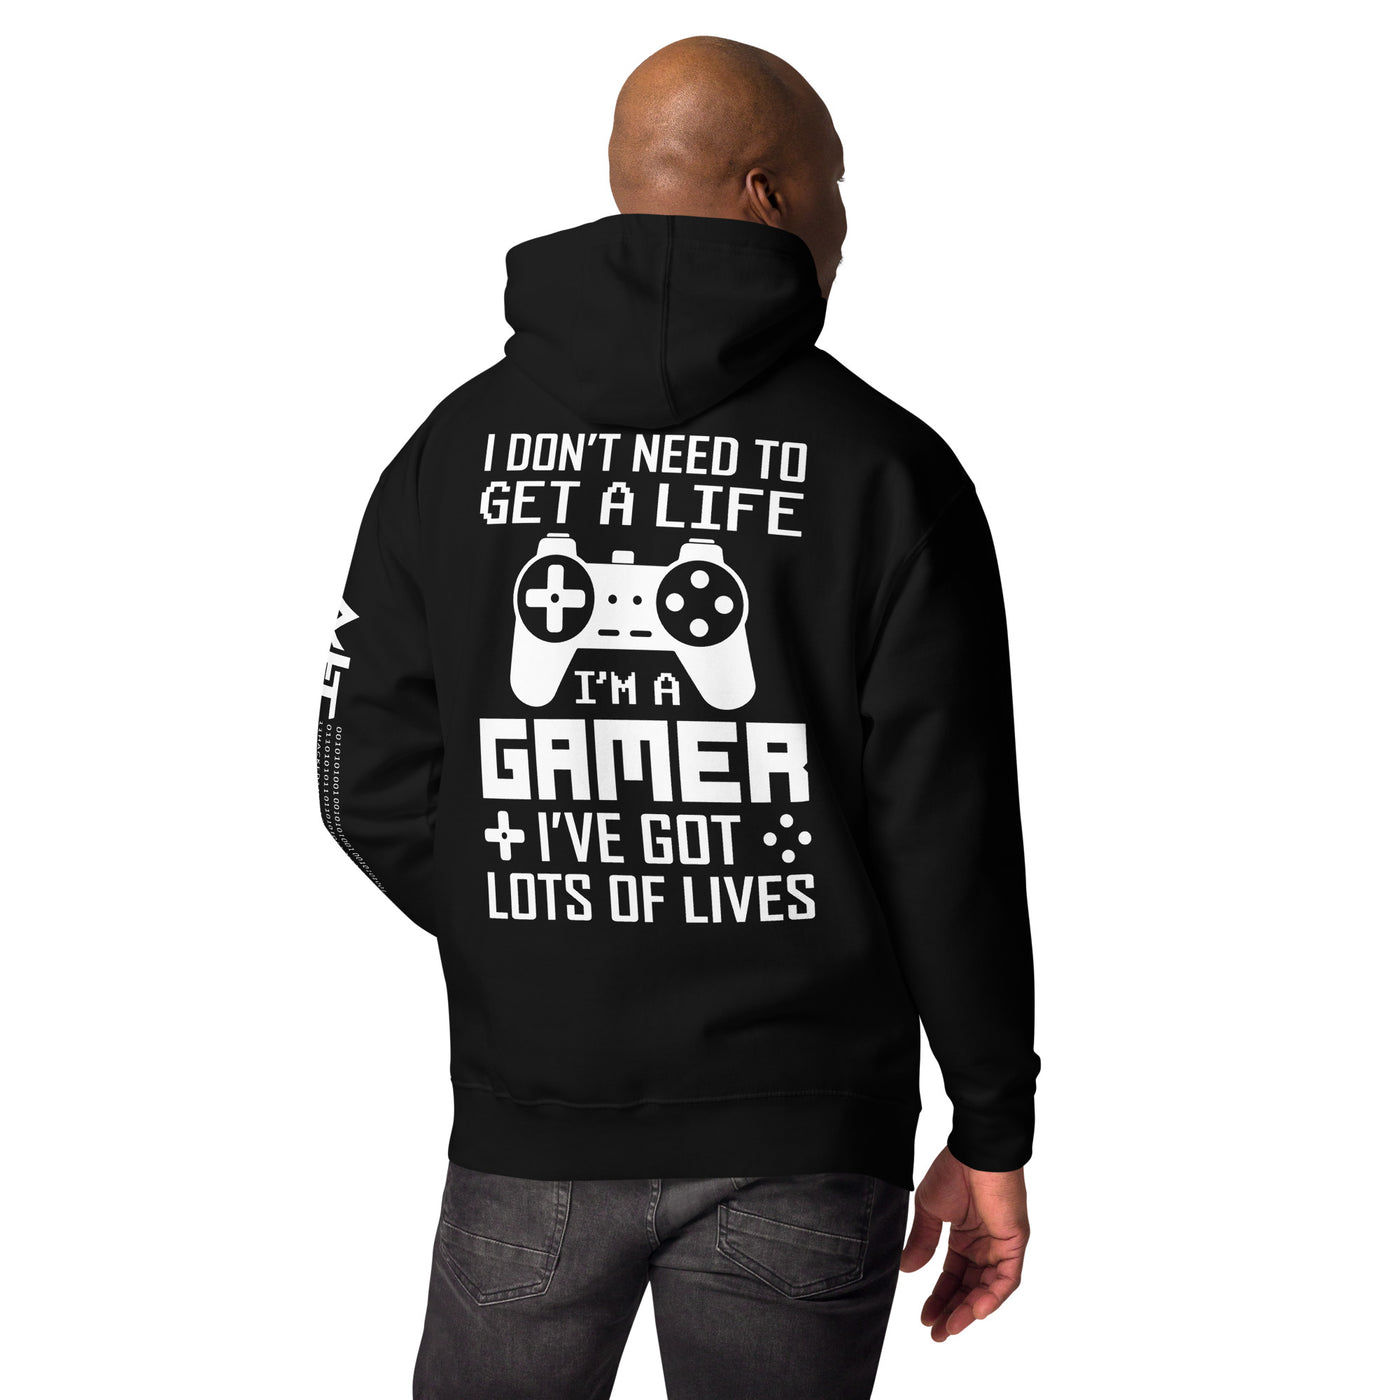 I don't need to get a life, I've already got lots of lives - Unisex Hoodie ( Back Print )